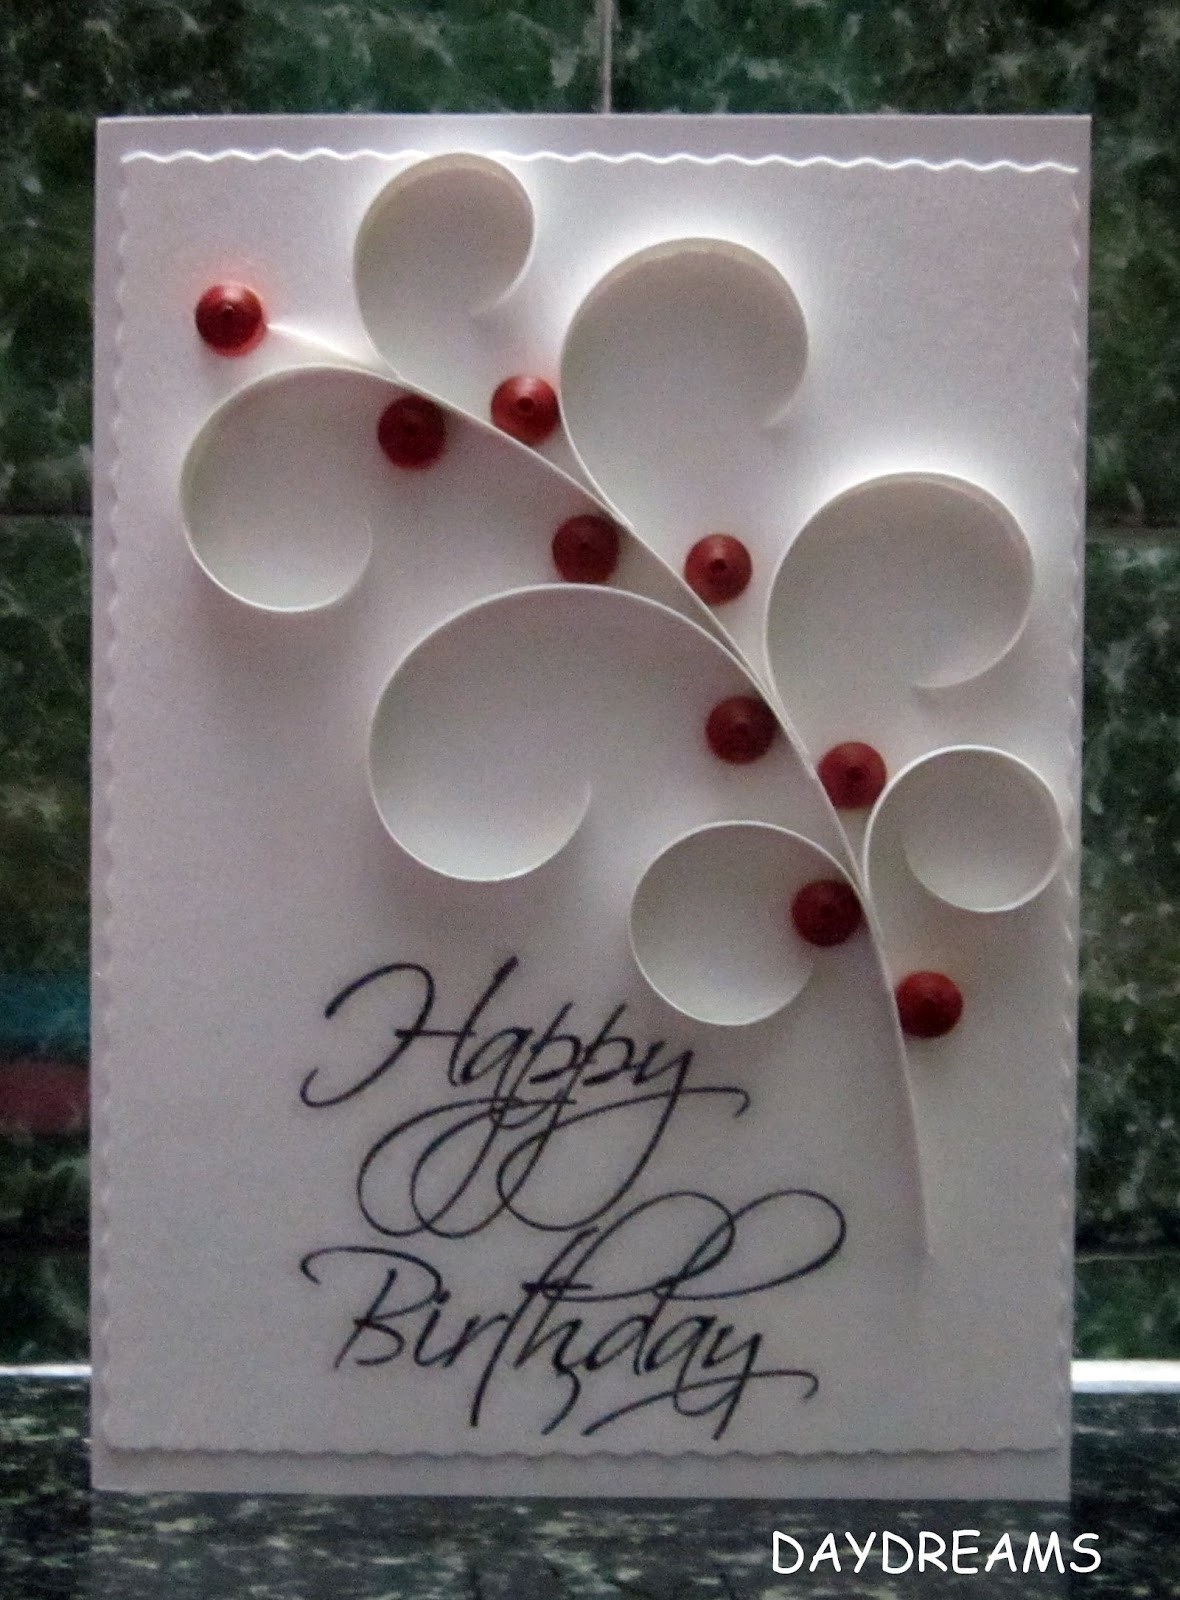 Best ideas about Birthday Card Design
. Save or Pin DAYDREAMS Quilled birthday card Now.